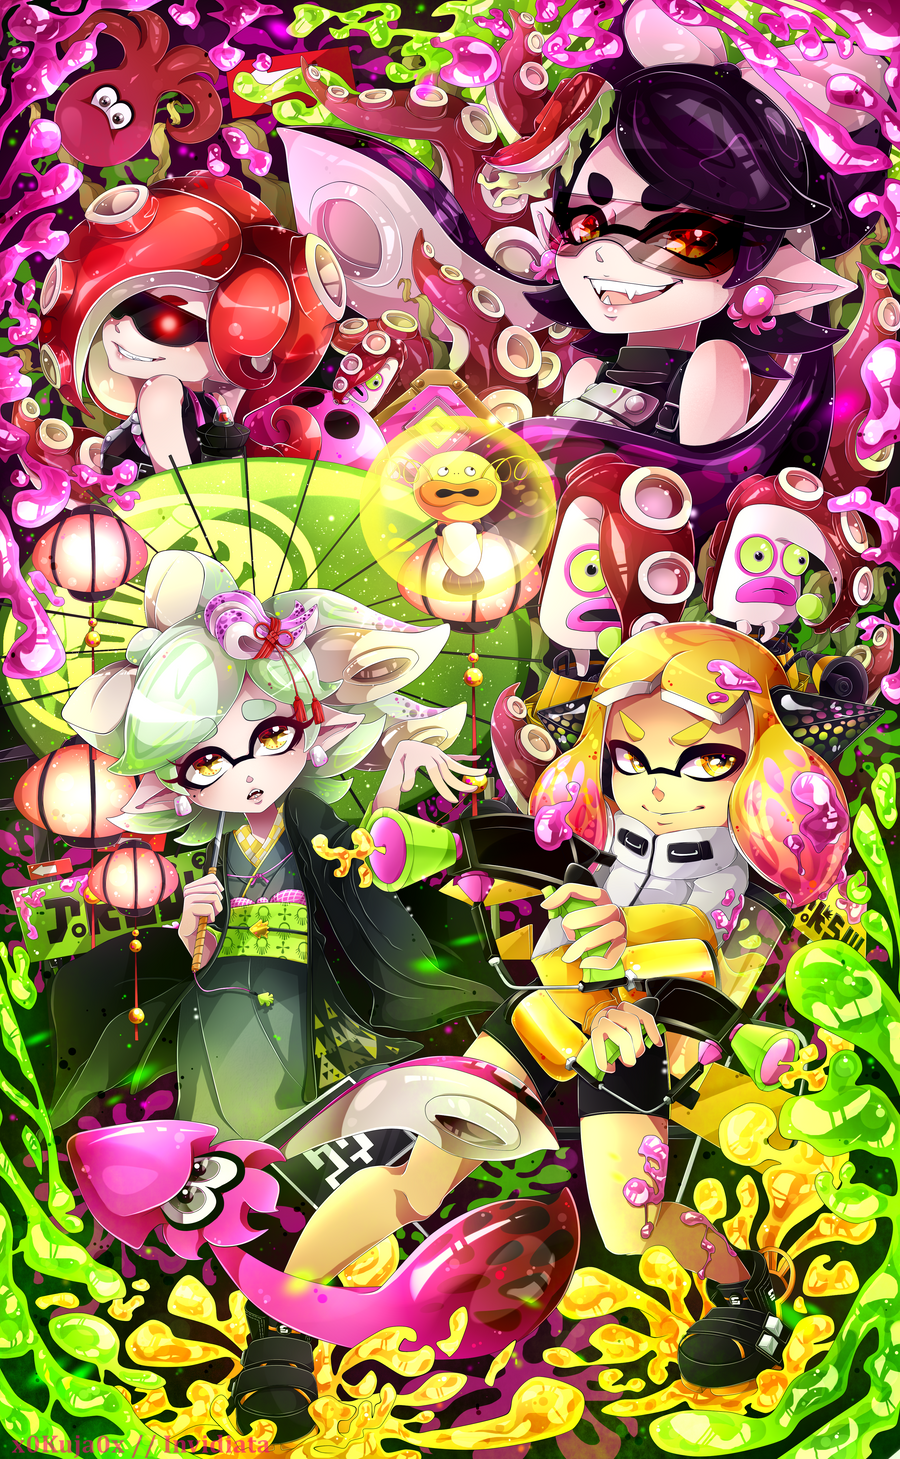 Yuga's Gallery of Nintendo Art (currently featuring: the Paper Mario series) Splatoon_2___contest_entry_by_invidiata-dbhdfll